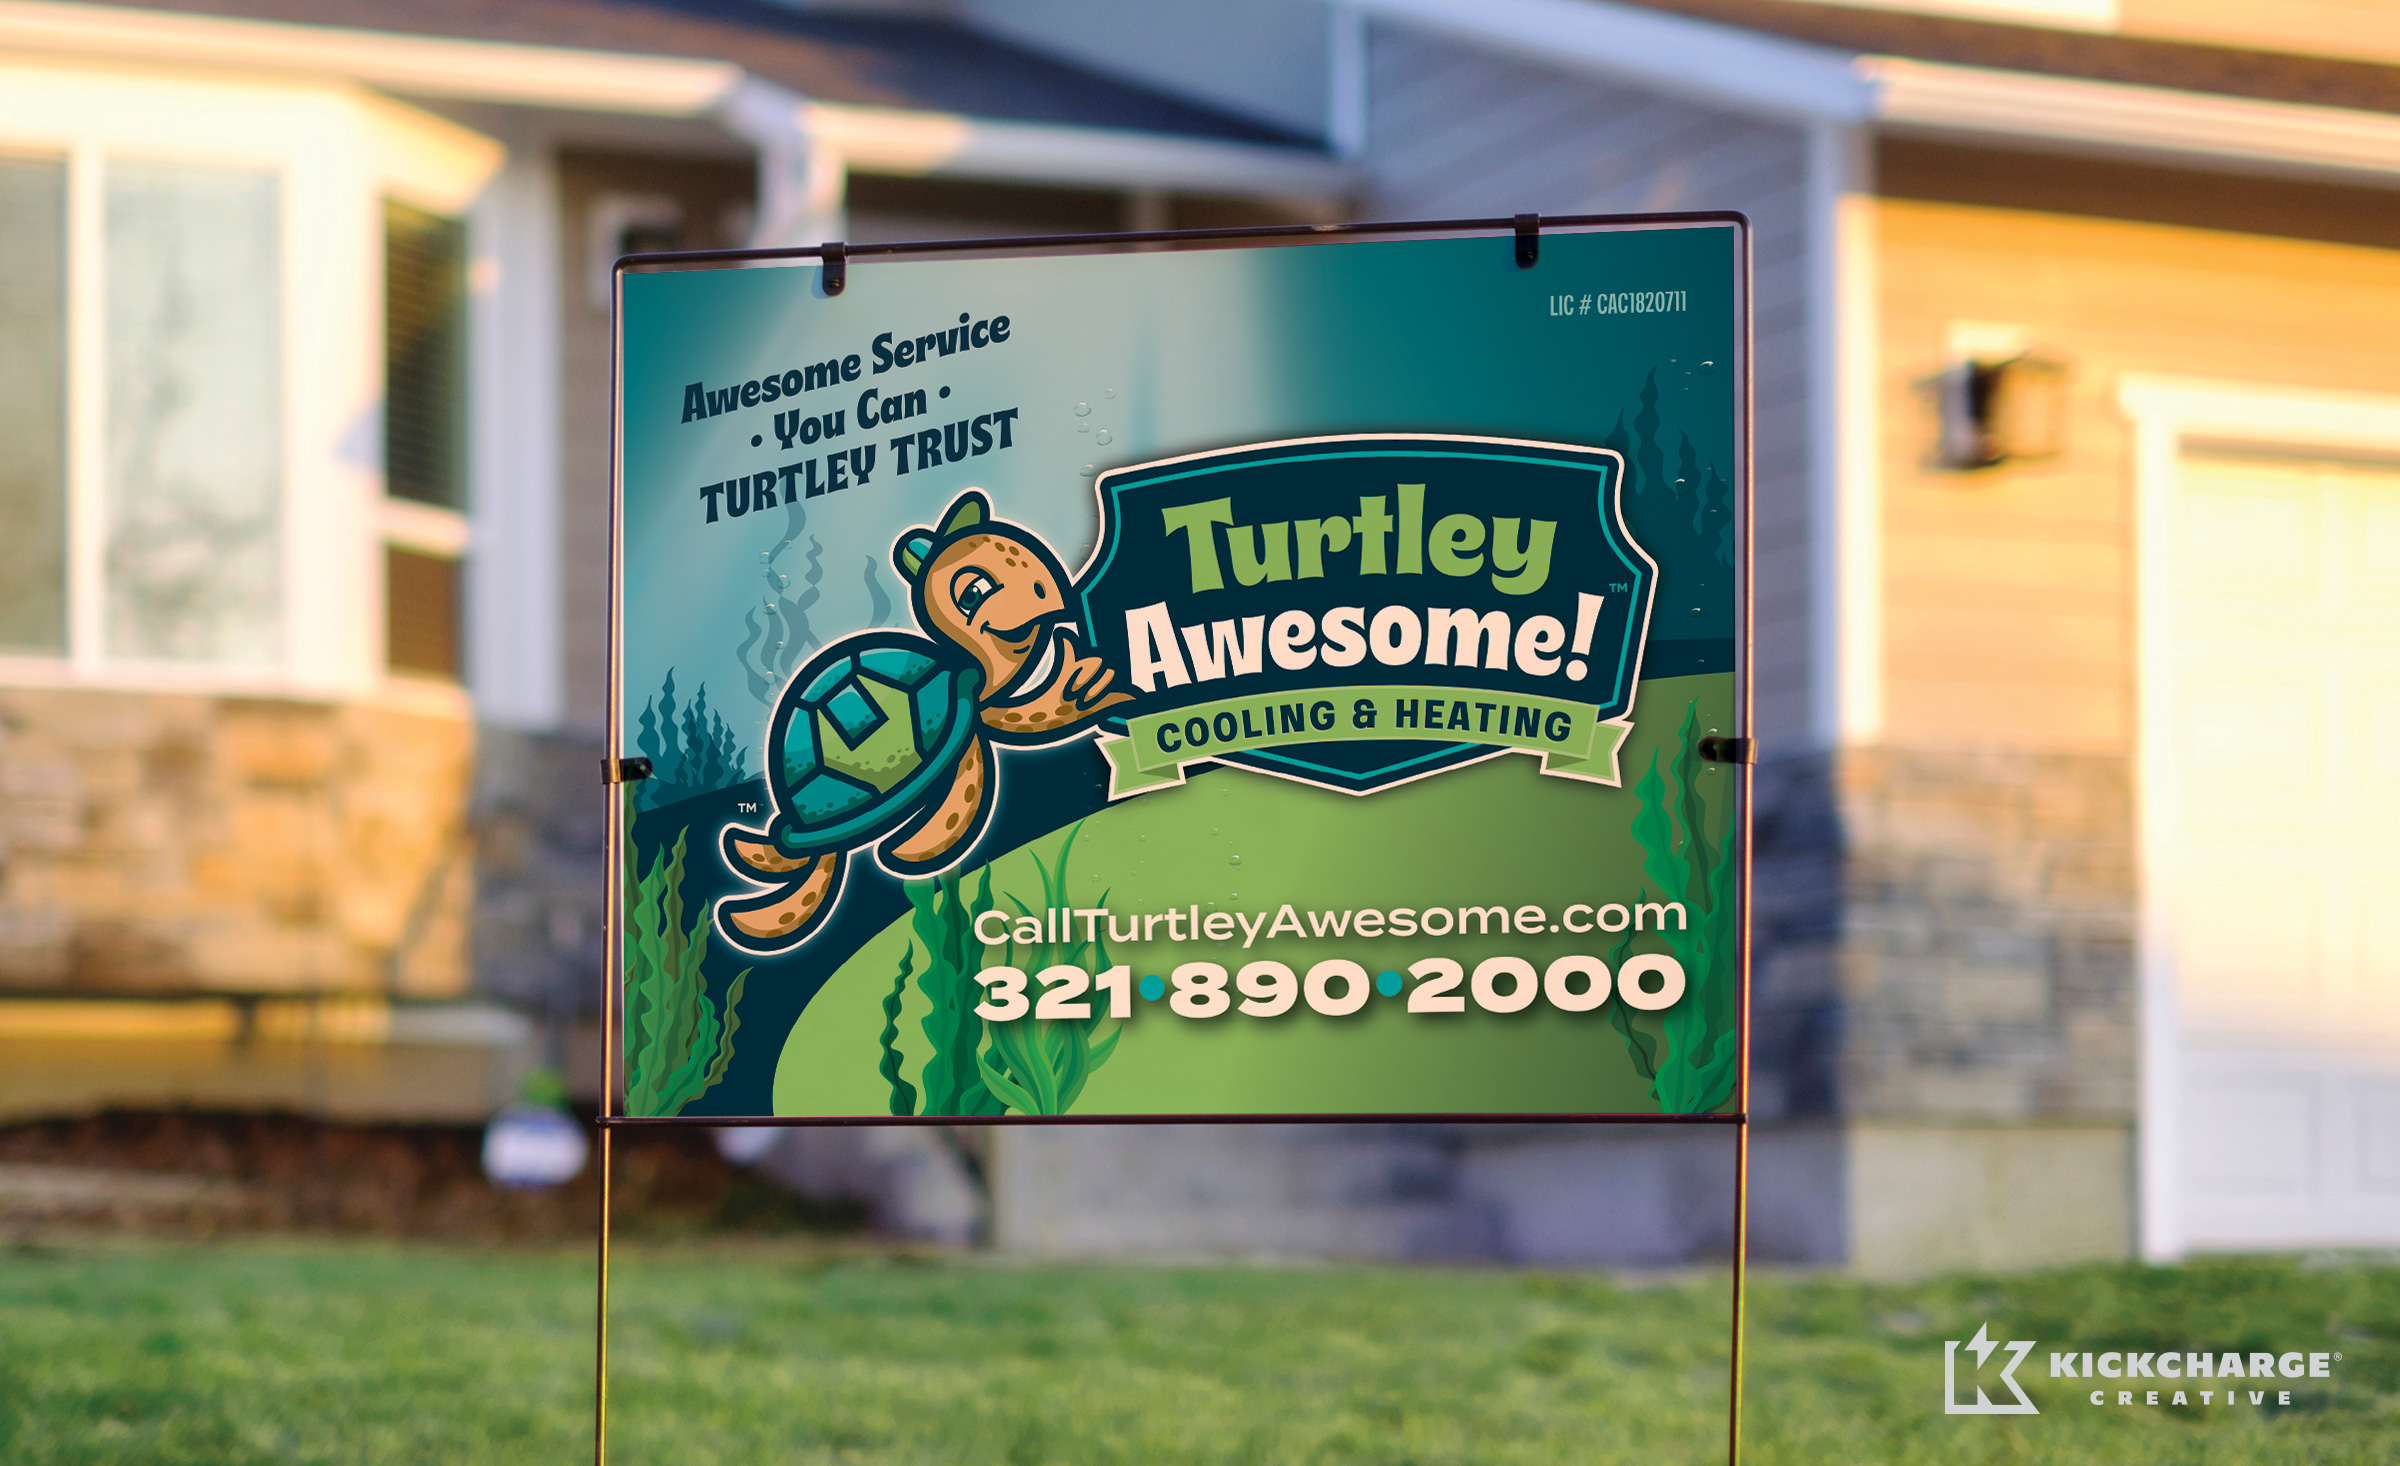 yard sign for Turtley Awesome! Cooling & Heating